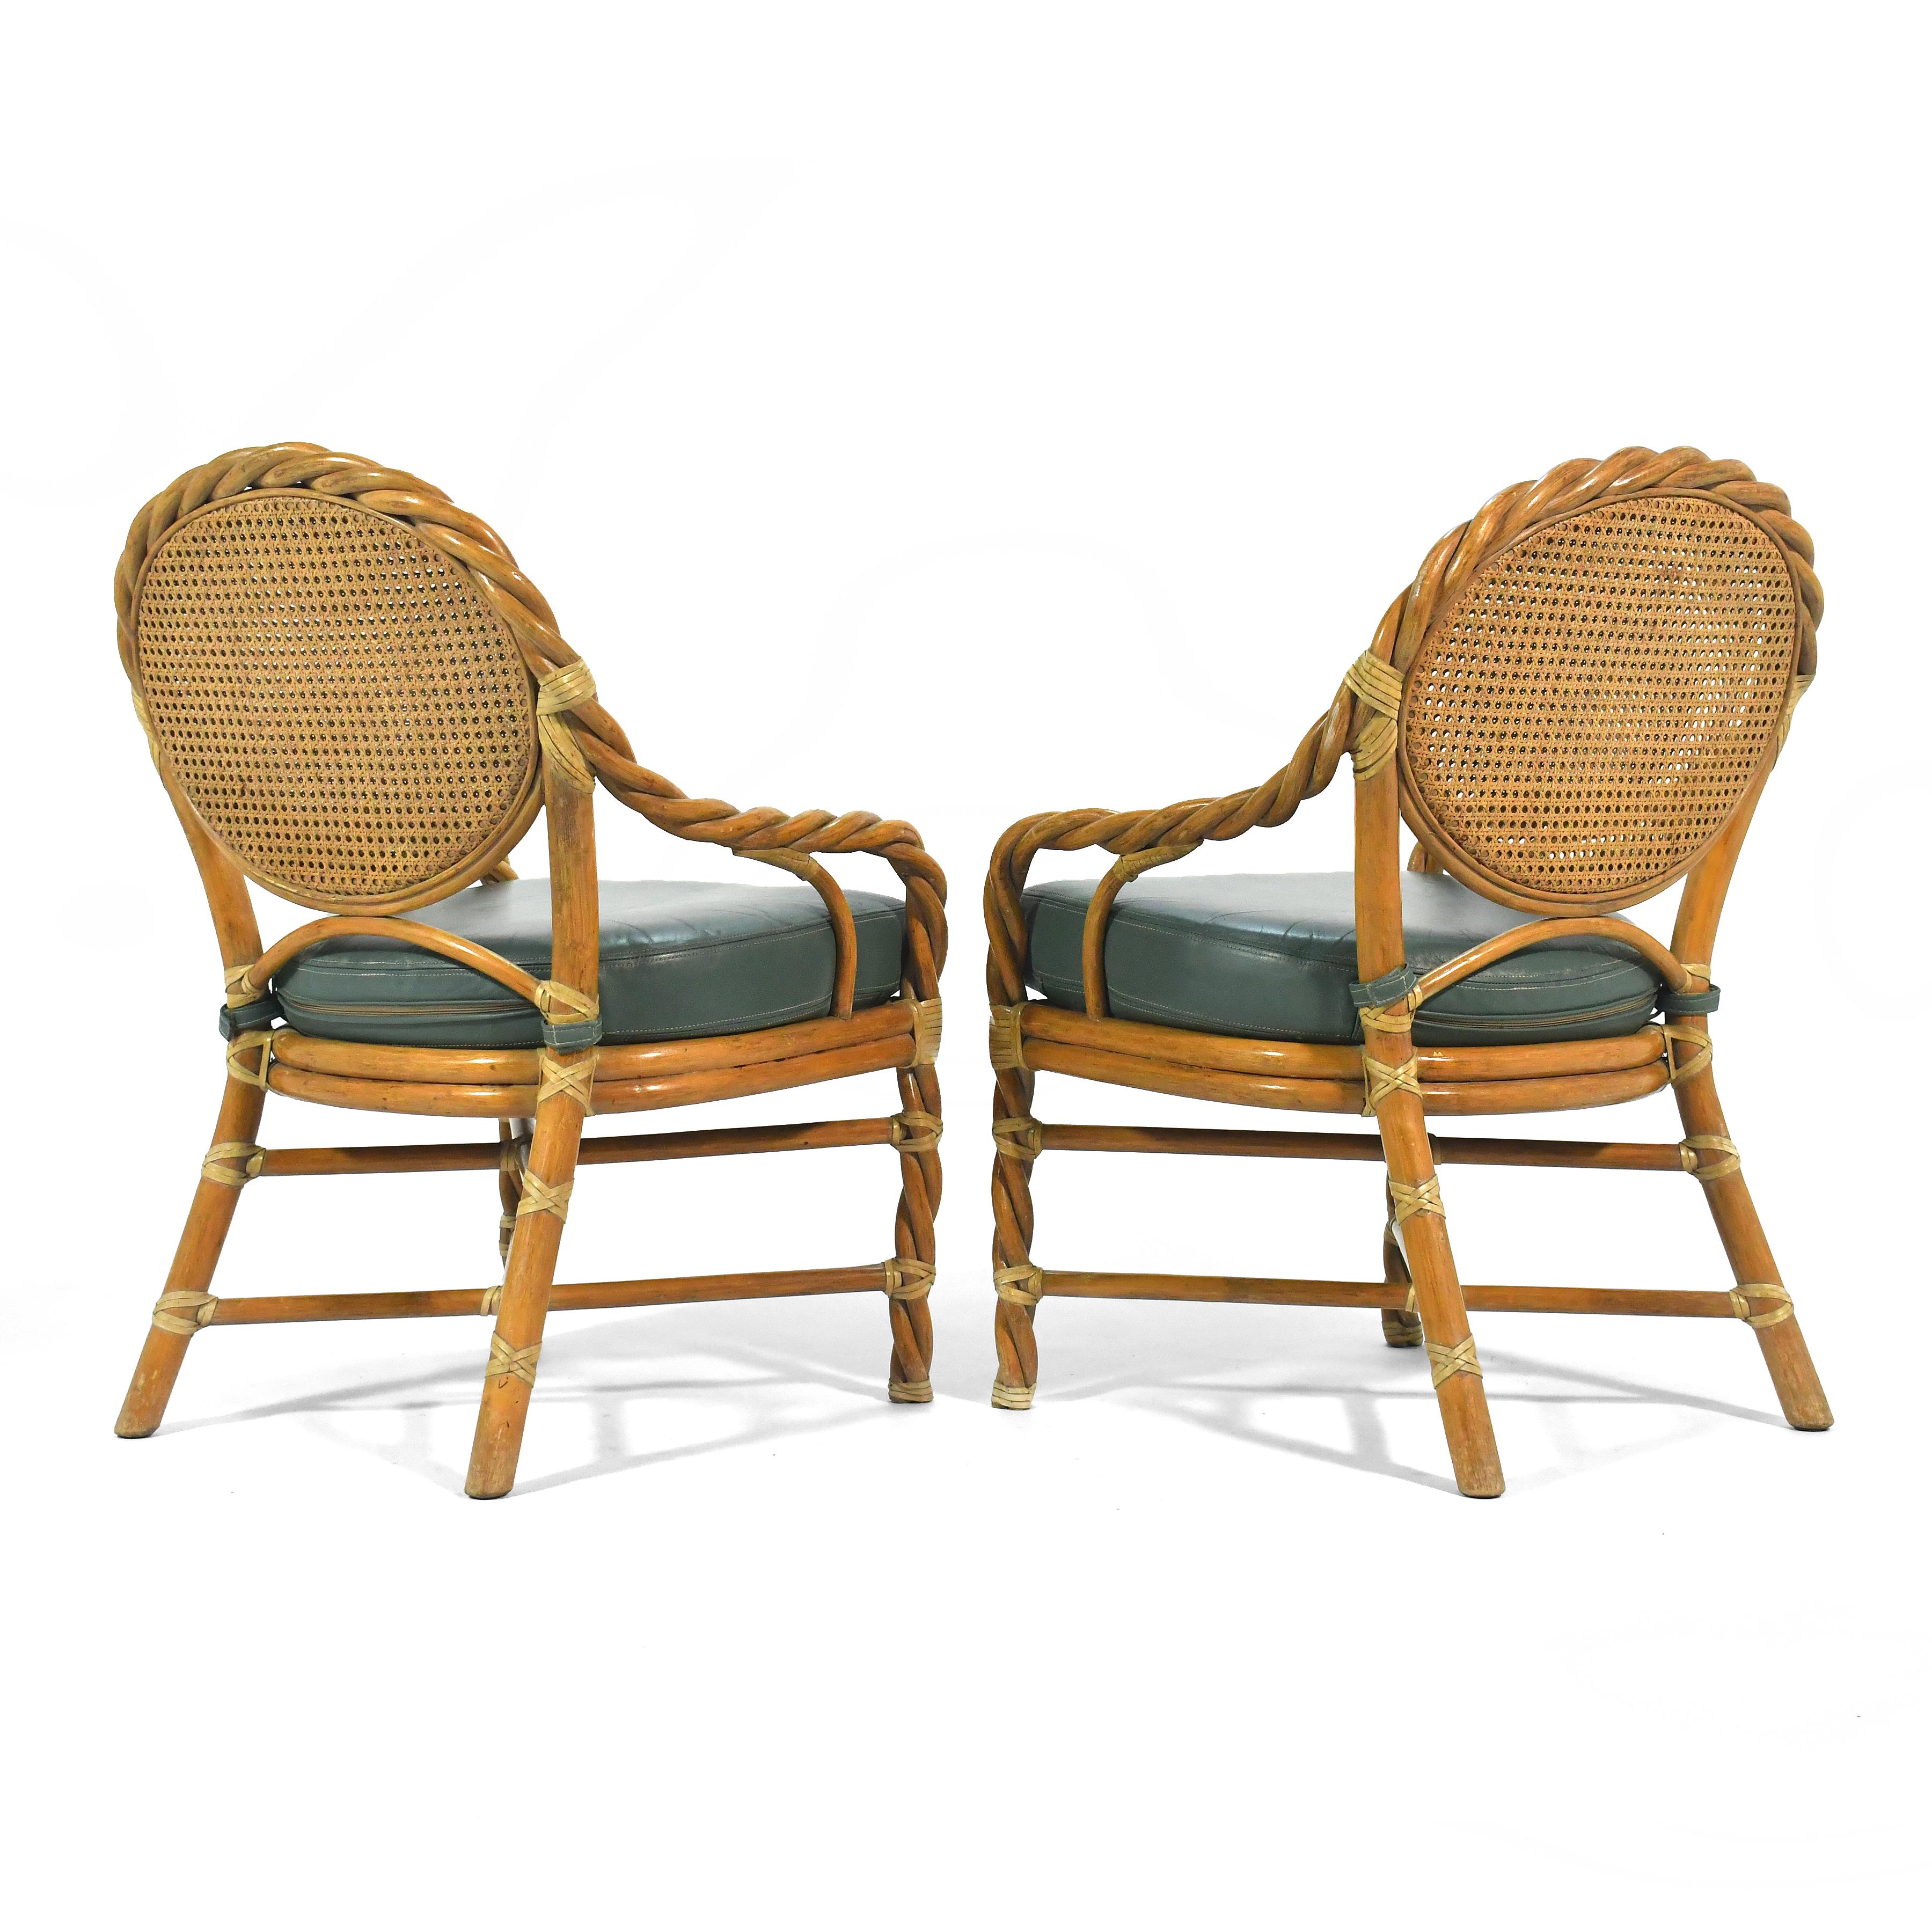 American Pair of McGuire Rattan Lounge Chairs